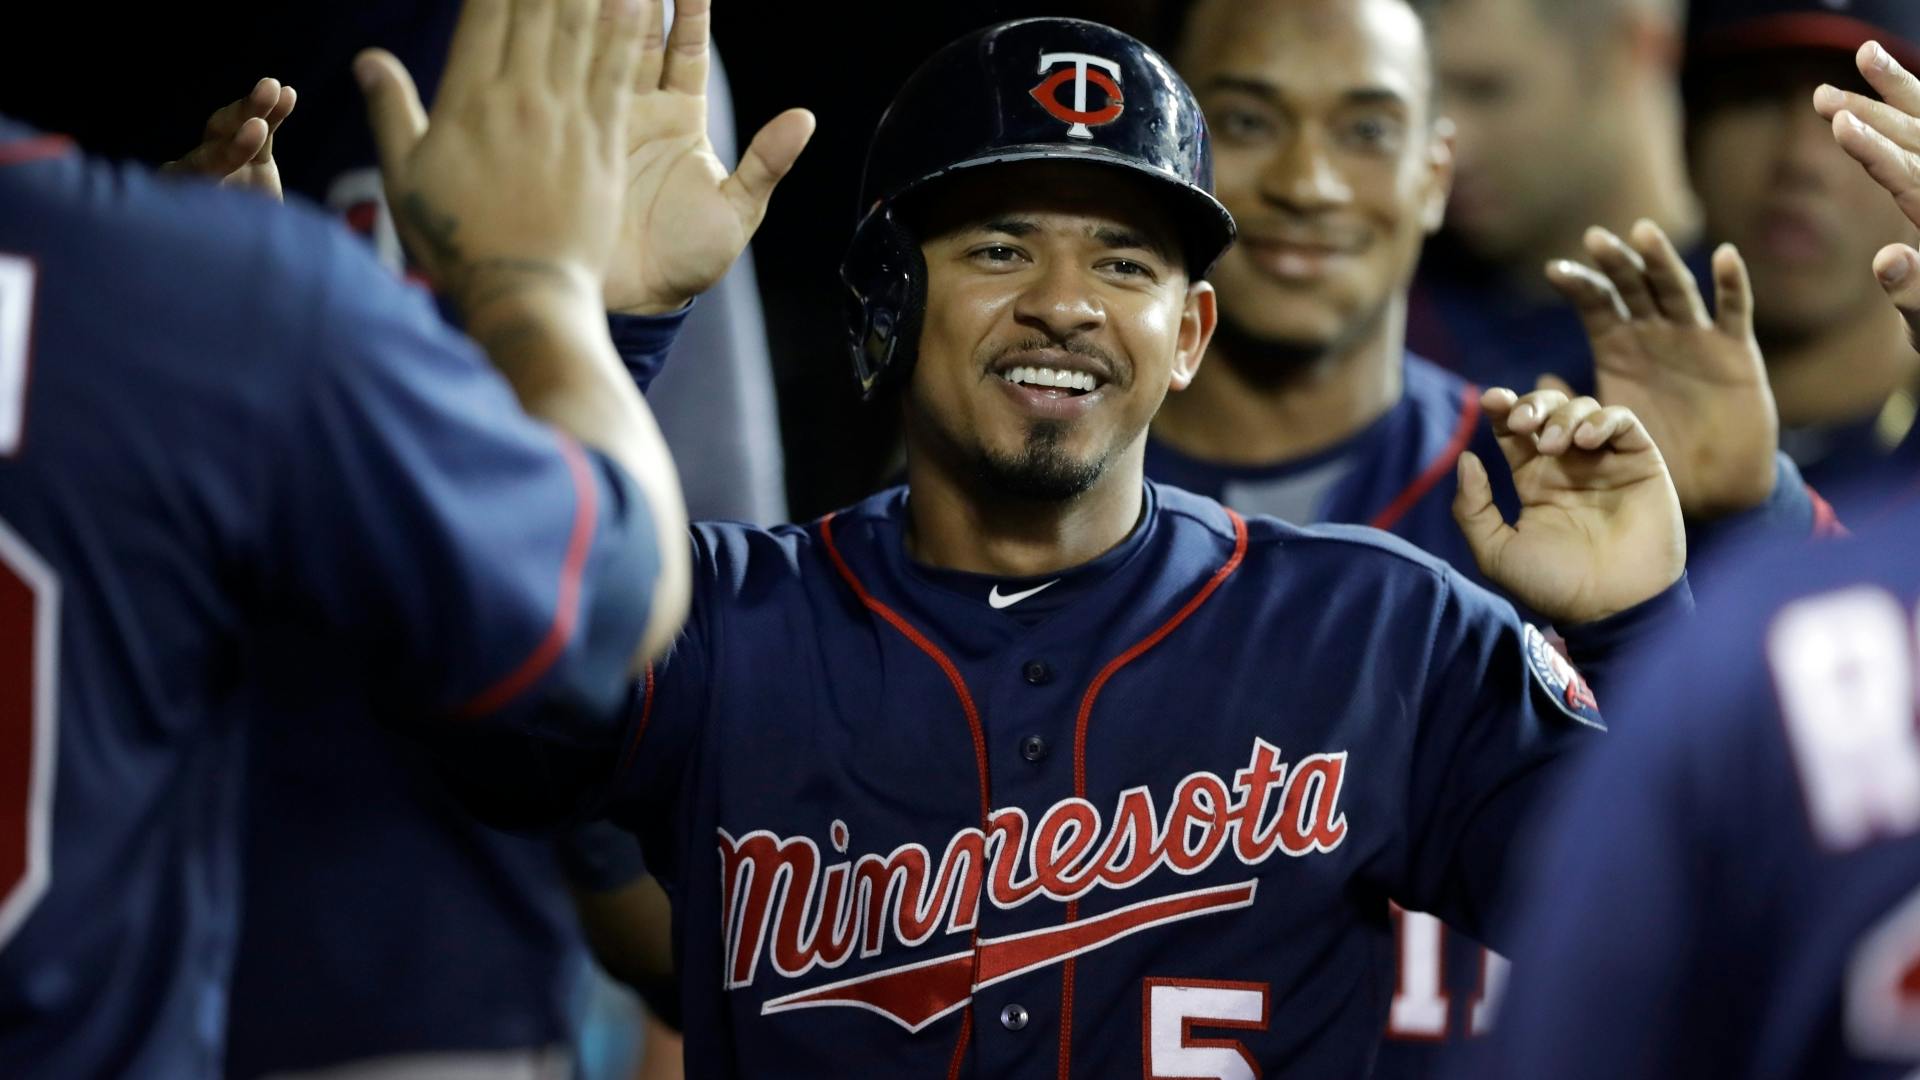 Eduardo Escobar ended up hitting a two-run single as part of an eight-run eighth inning on Saturday.